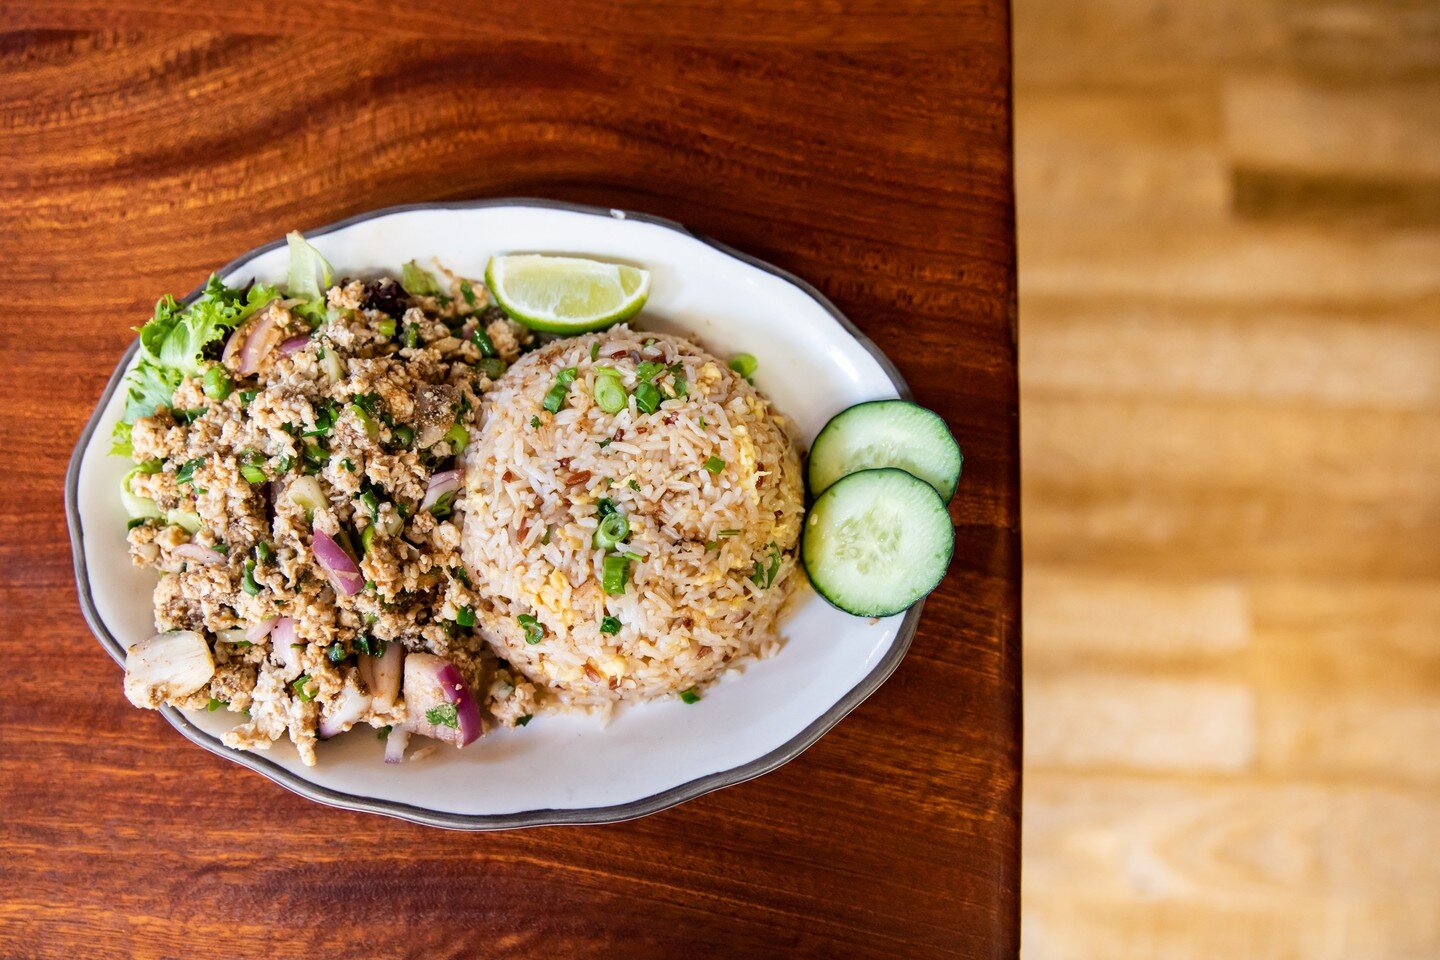 Thai meat salad in garlic lime sauce and house garlic-egg fried rice.

TO-GO / Delivery / Dinning
11A &ndash; Close

Web: www.thaipeacockpdx.com

#thaipeacock #thaipeacockpdx #pdxdining #eeeeeats #portlandfood #thaifood #pdxeats #portlandfoodie #eate